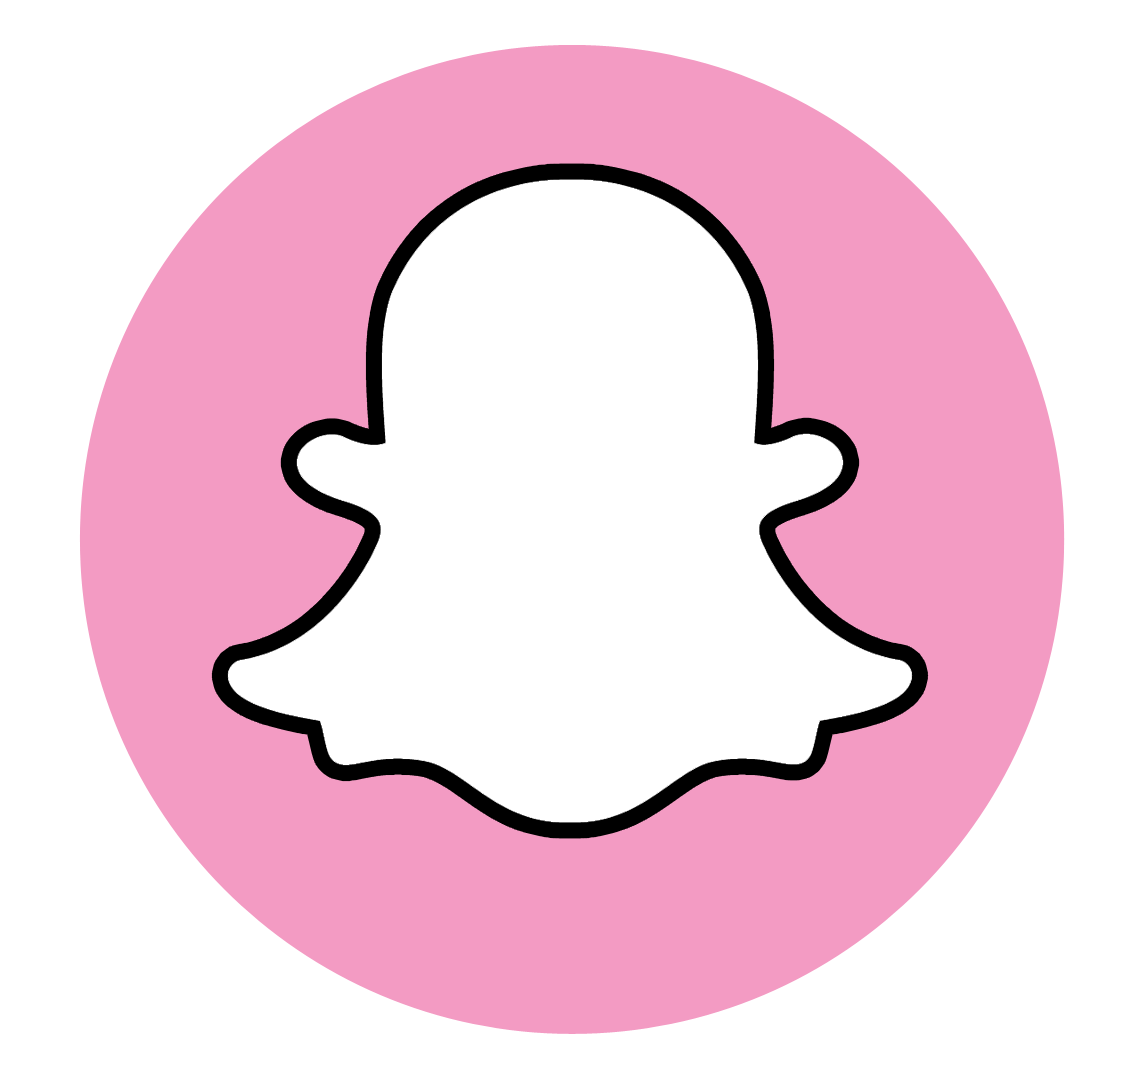 Pink Transparent Logo - Snapchat Logo Transparent PNG Pictures - Free Icons and PNG Backgrounds